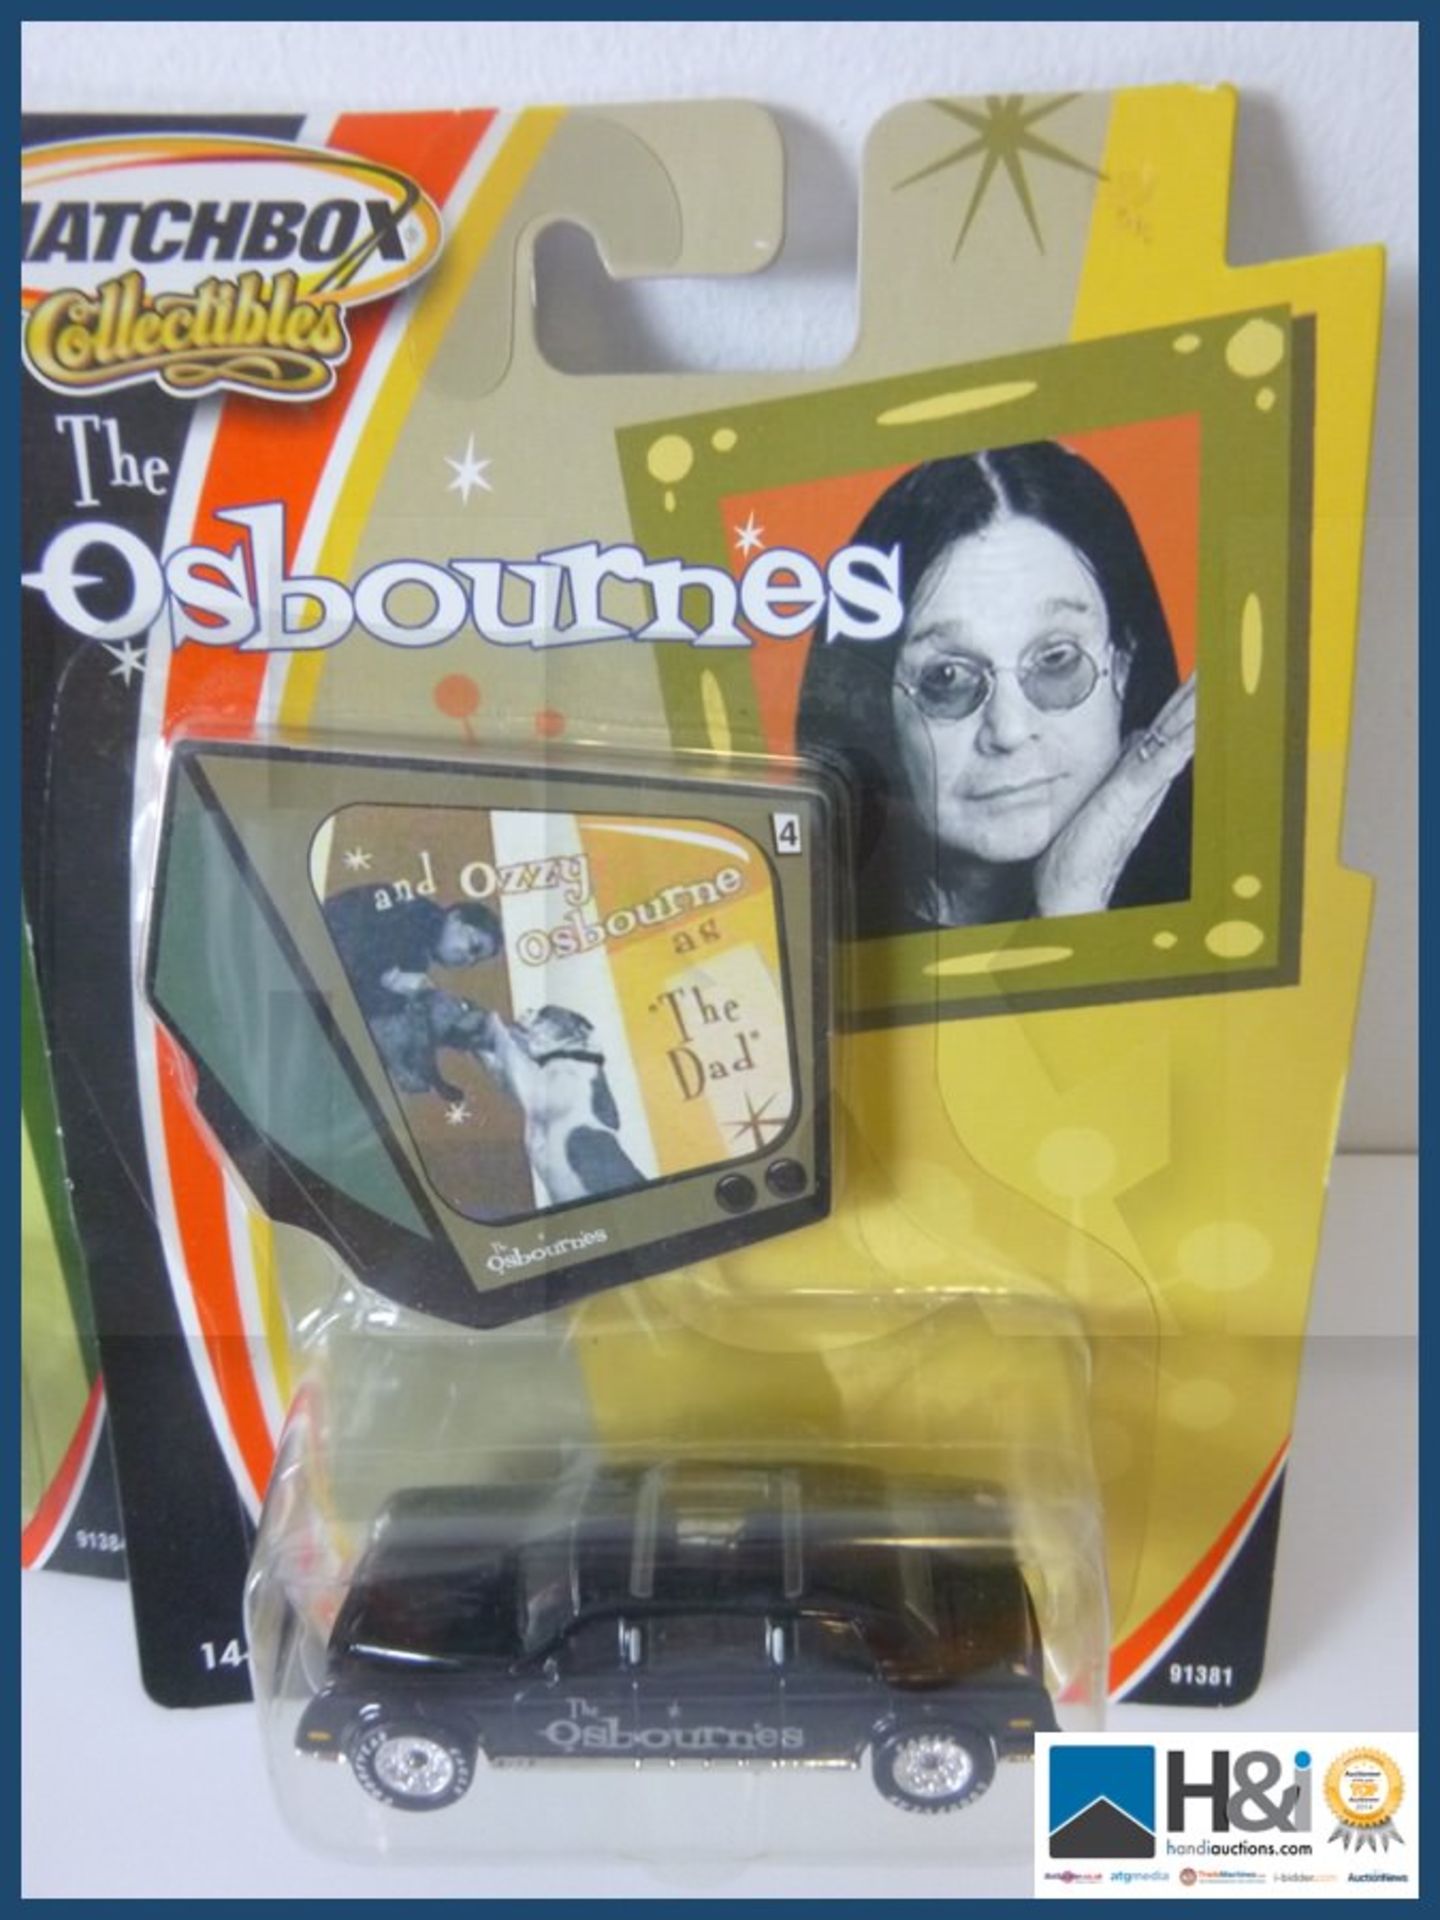 X4 Matchbox collectables The osbournes. - Image 5 of 5